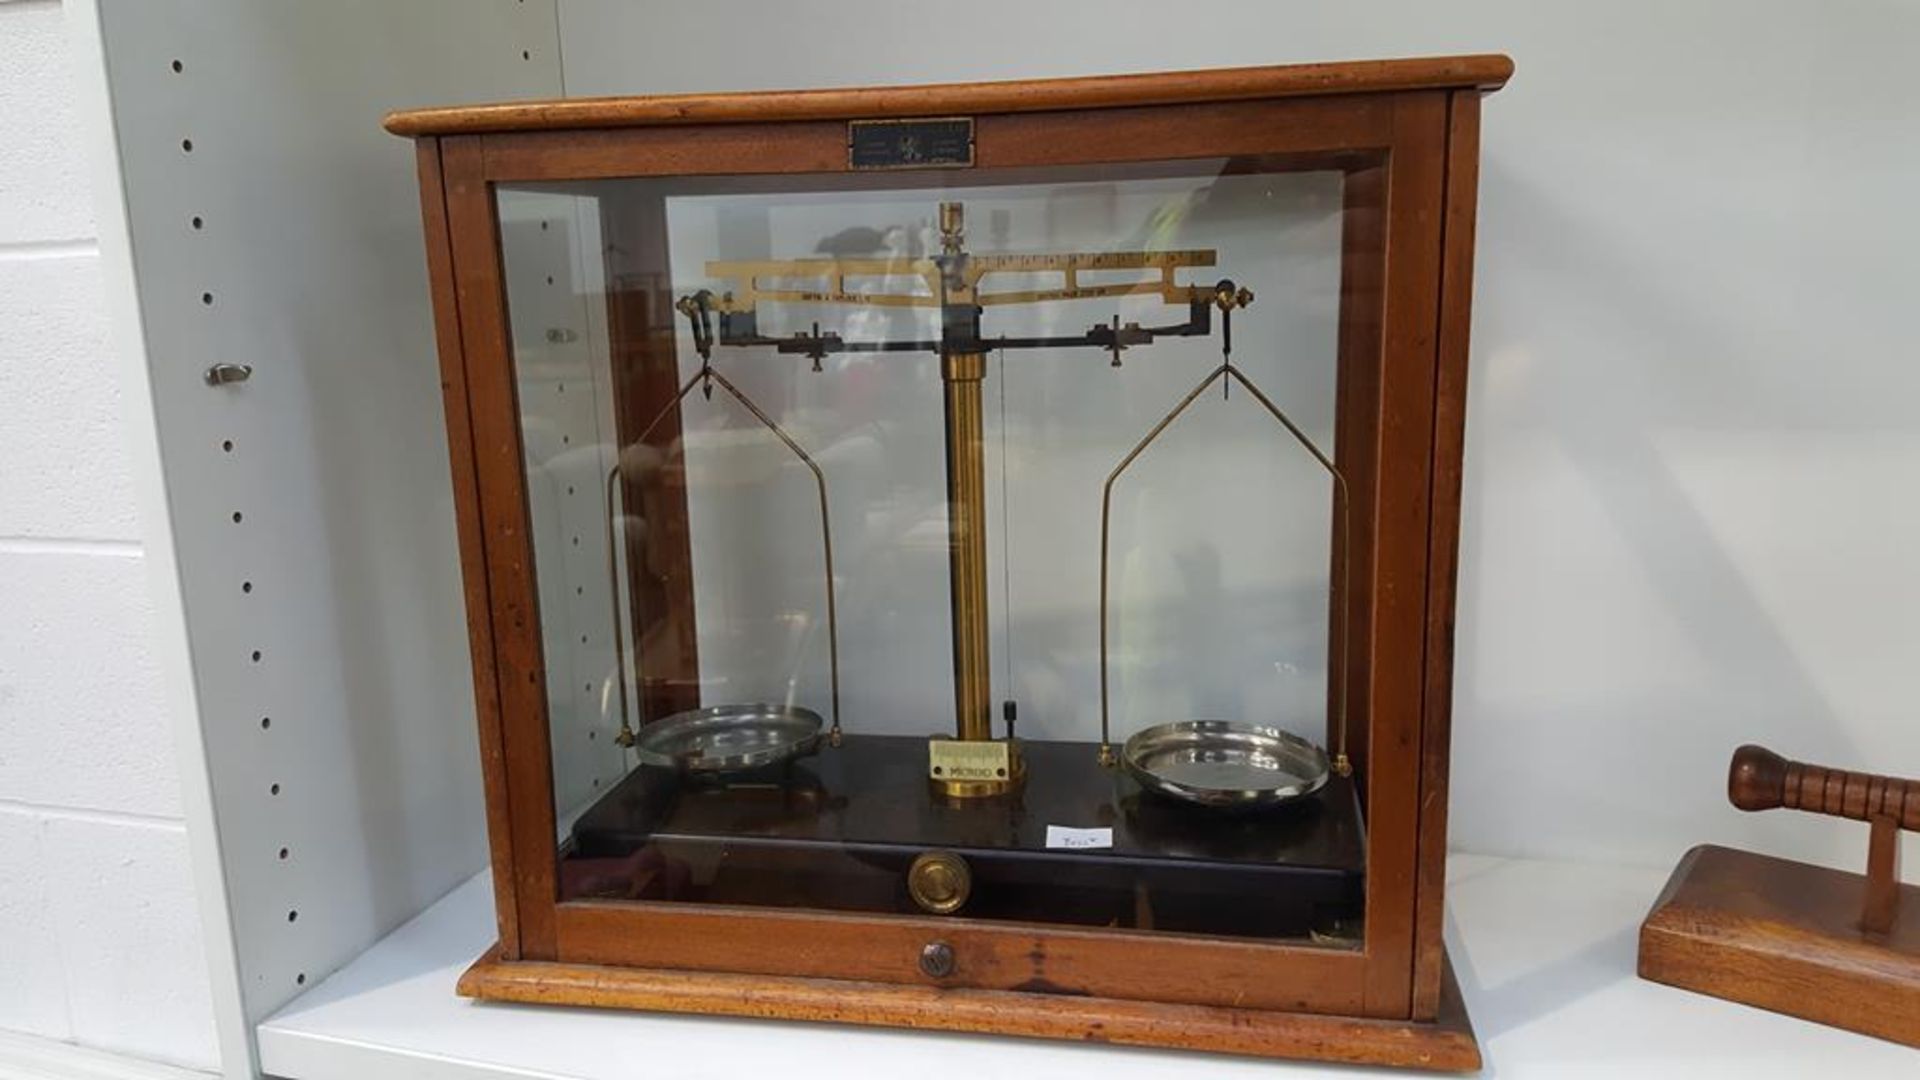 A Griffin & Tatlock set of brass Counter-Balance Scales in Display Case (est £40-£60)